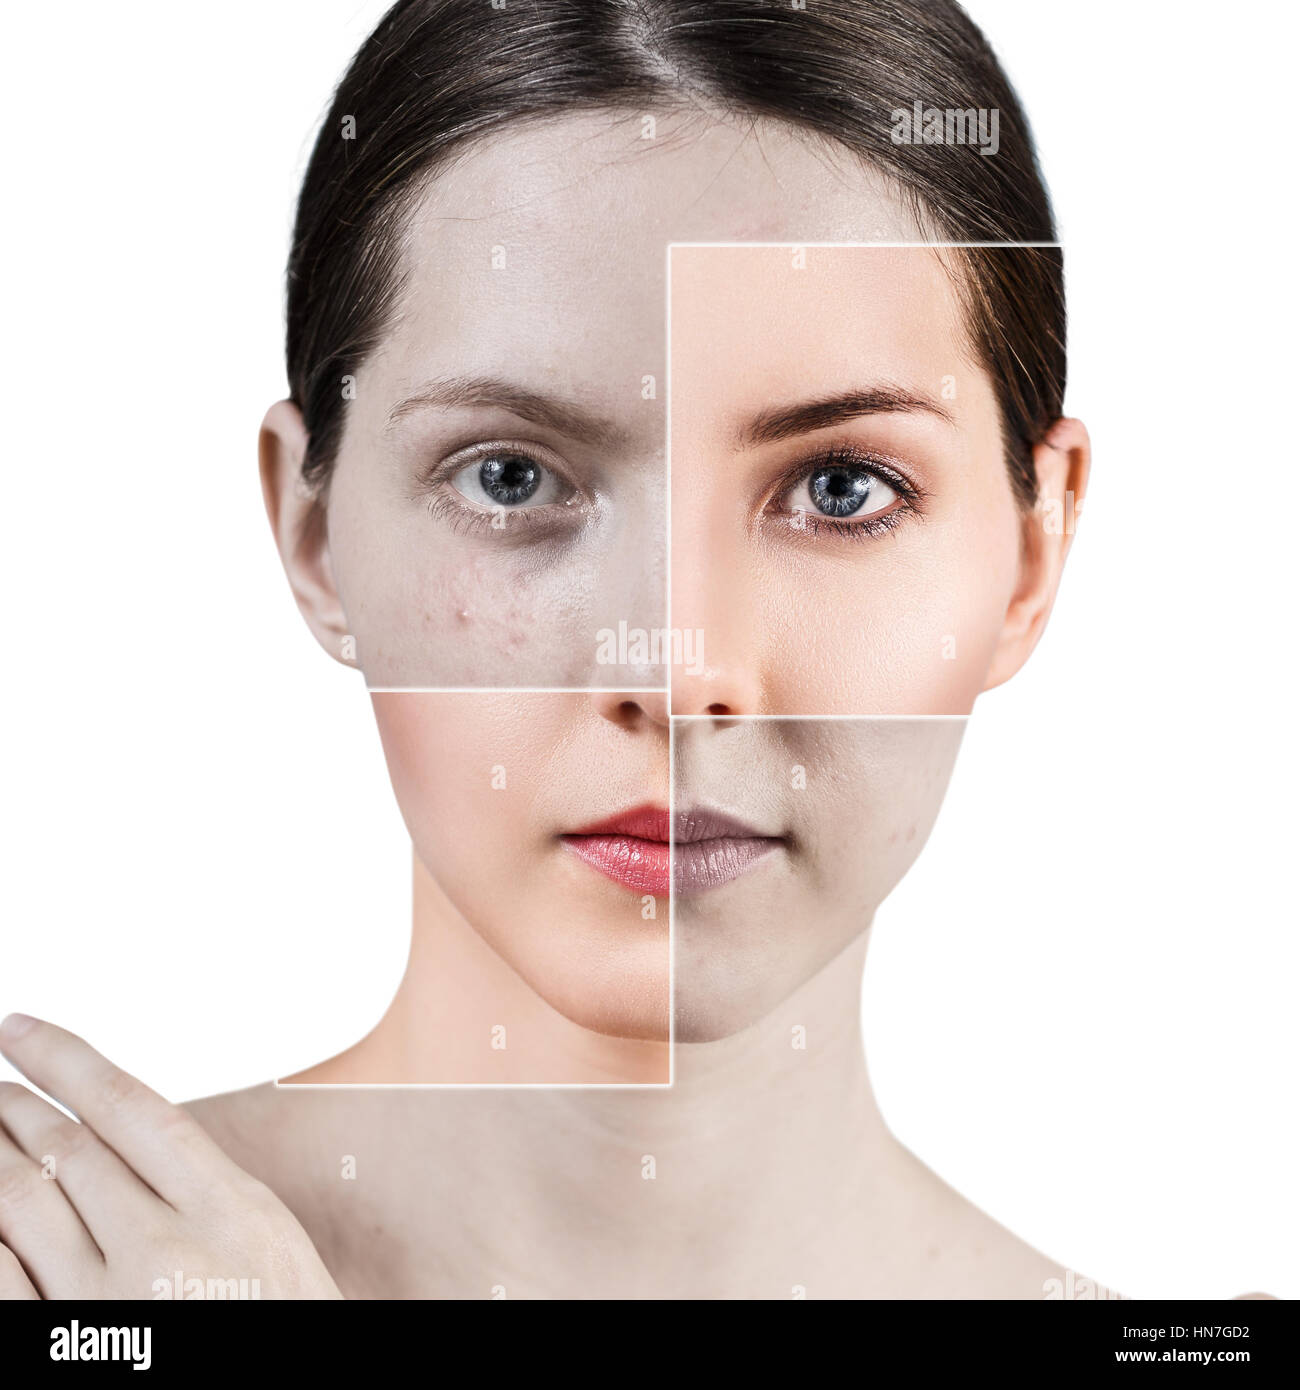 Square parts shows skin after treatment. Stock Photo